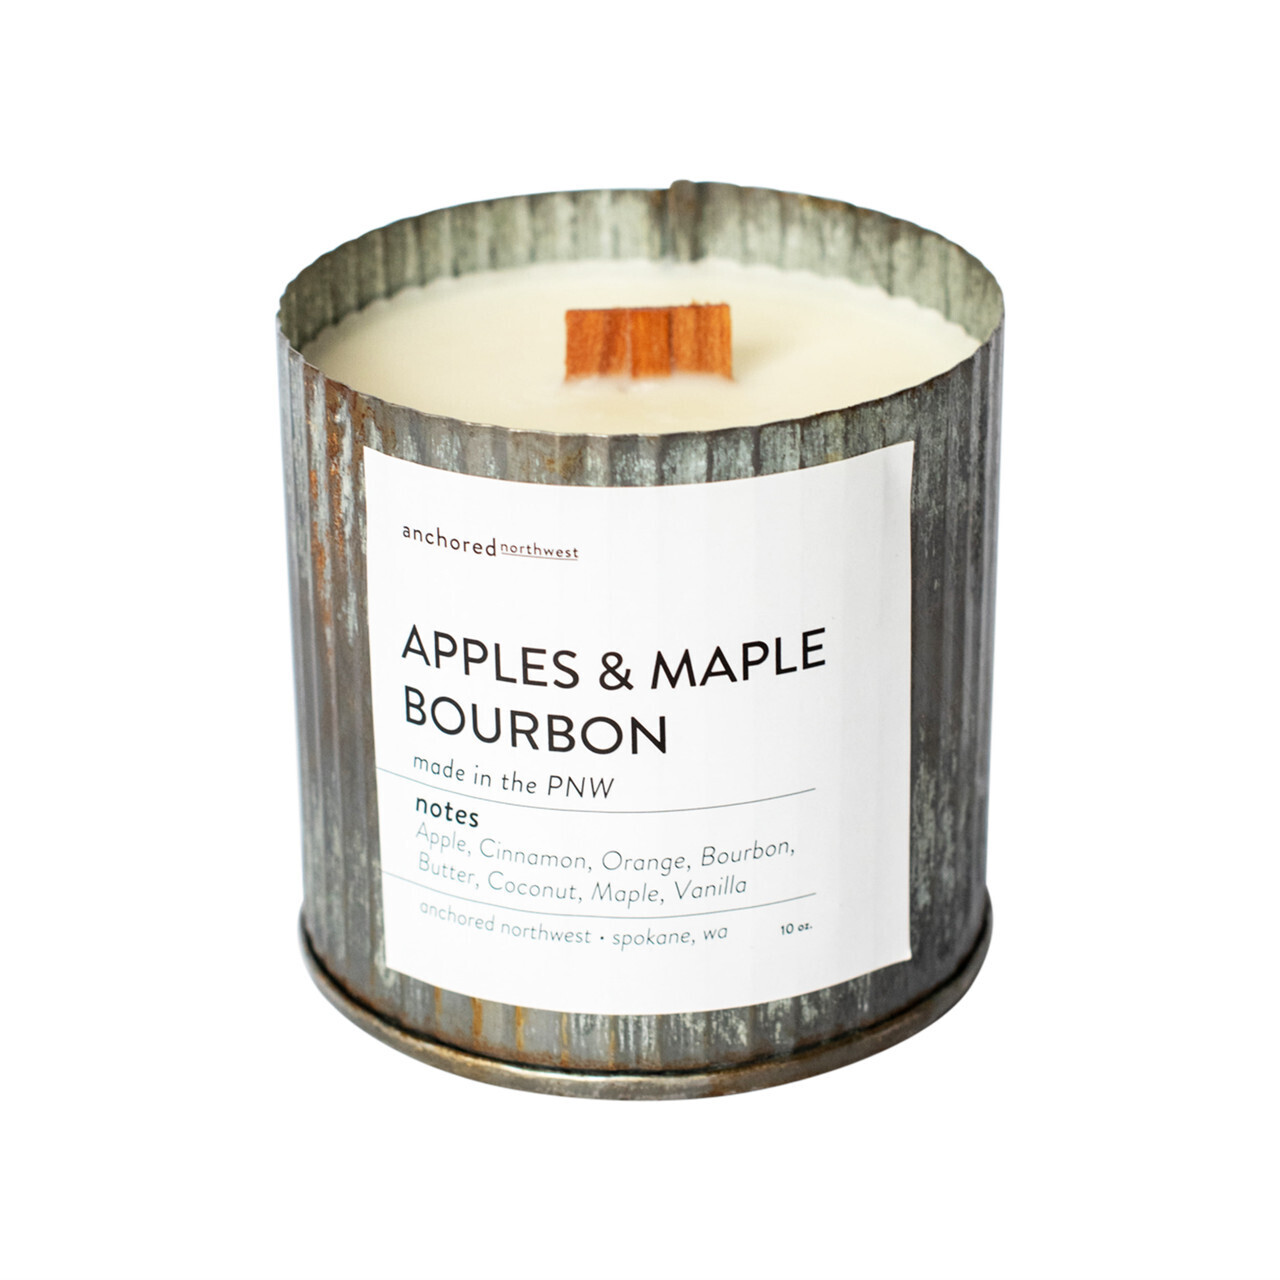 Apples & Maple Bourbon  Rustic Vintage Candle by Anchored Northwest